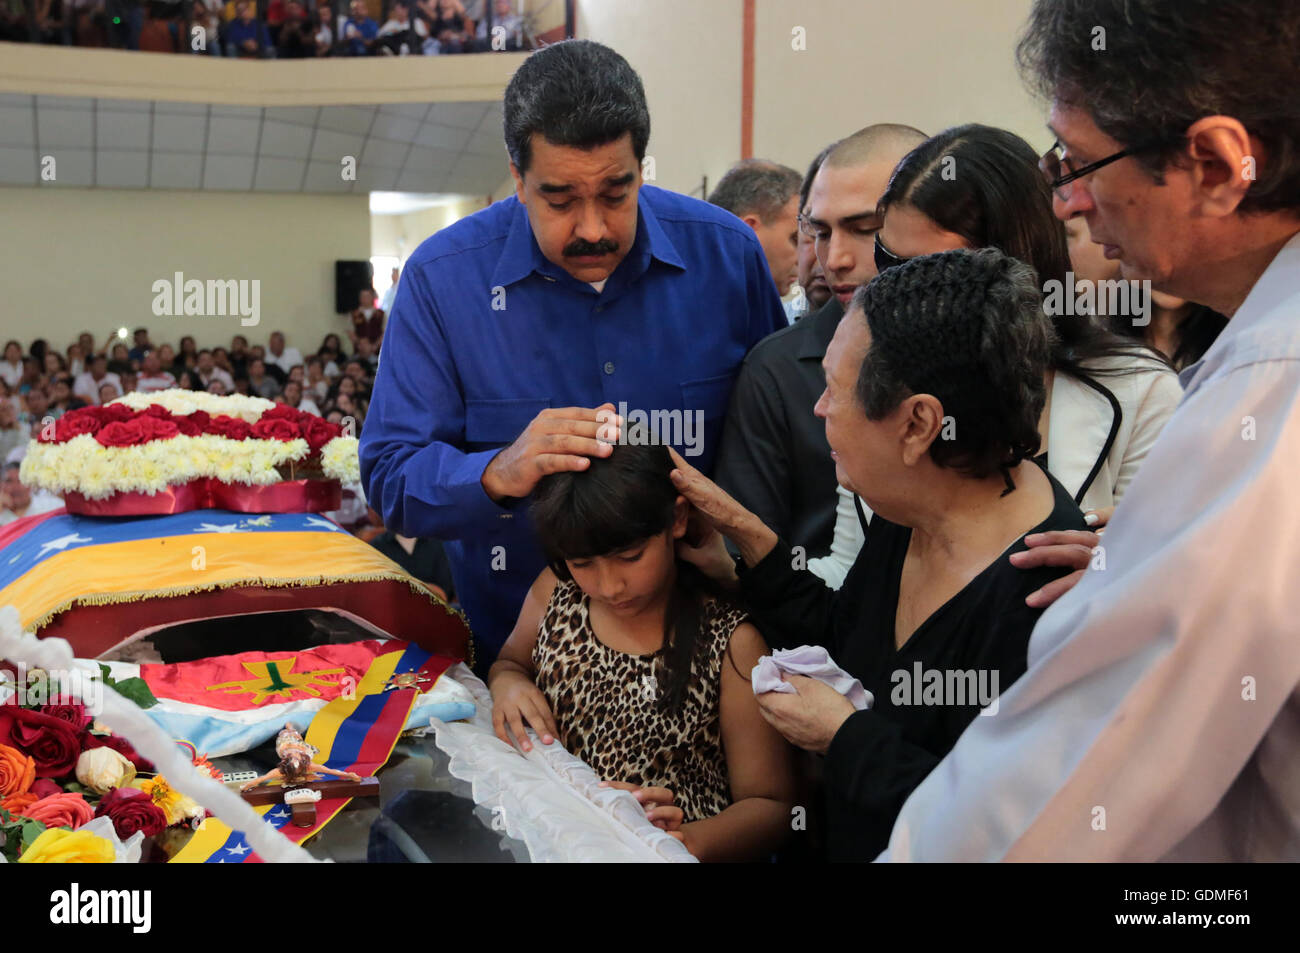 Barinas, Venezuela. 19th July, 2016. Image provided by the Venezuelan Presidency shows President Nicolas Maduro (R) interacting with a girl during the funeral of Anibal Chavez, brother of late Venezuelan President Hugo Chavez, at Casa del Alba, in Barinas, Venezuela, on July 19, 2016. Credit:  Venezuela's Presidency/Xinhua/Alamy Live News Stock Photo